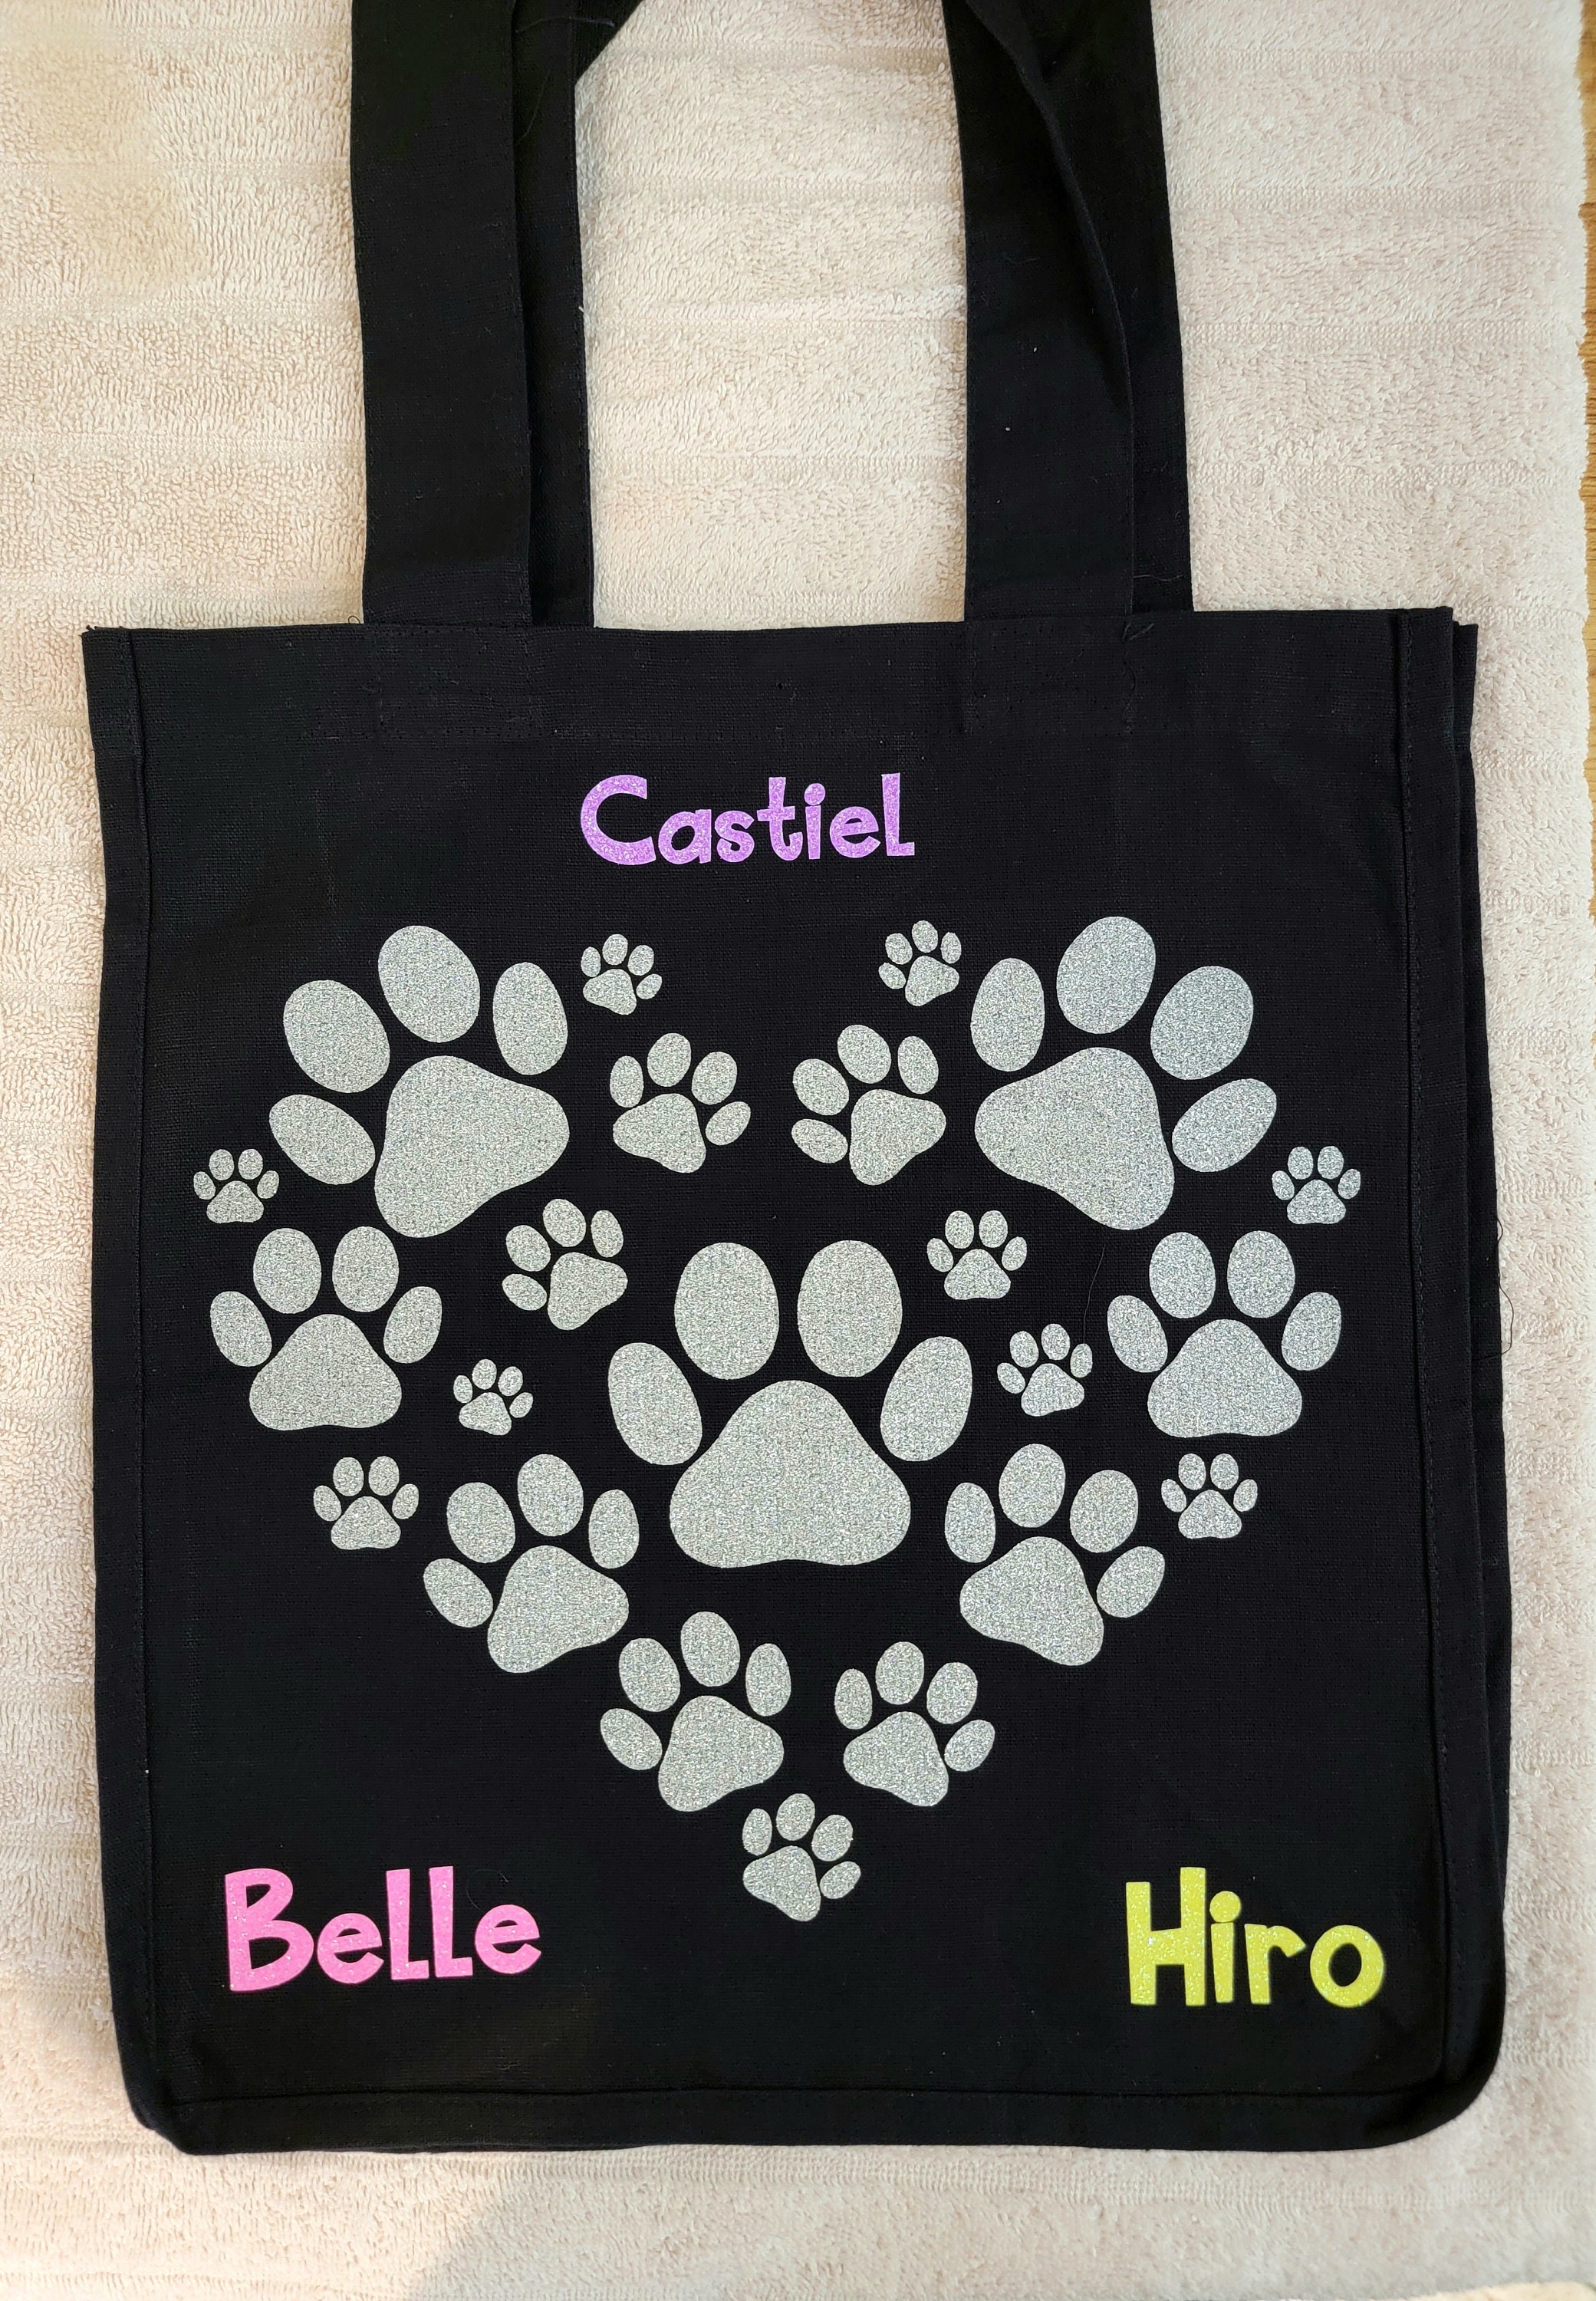 Paw Print - Personalized Custom Leather Bag – PAWSIONATE